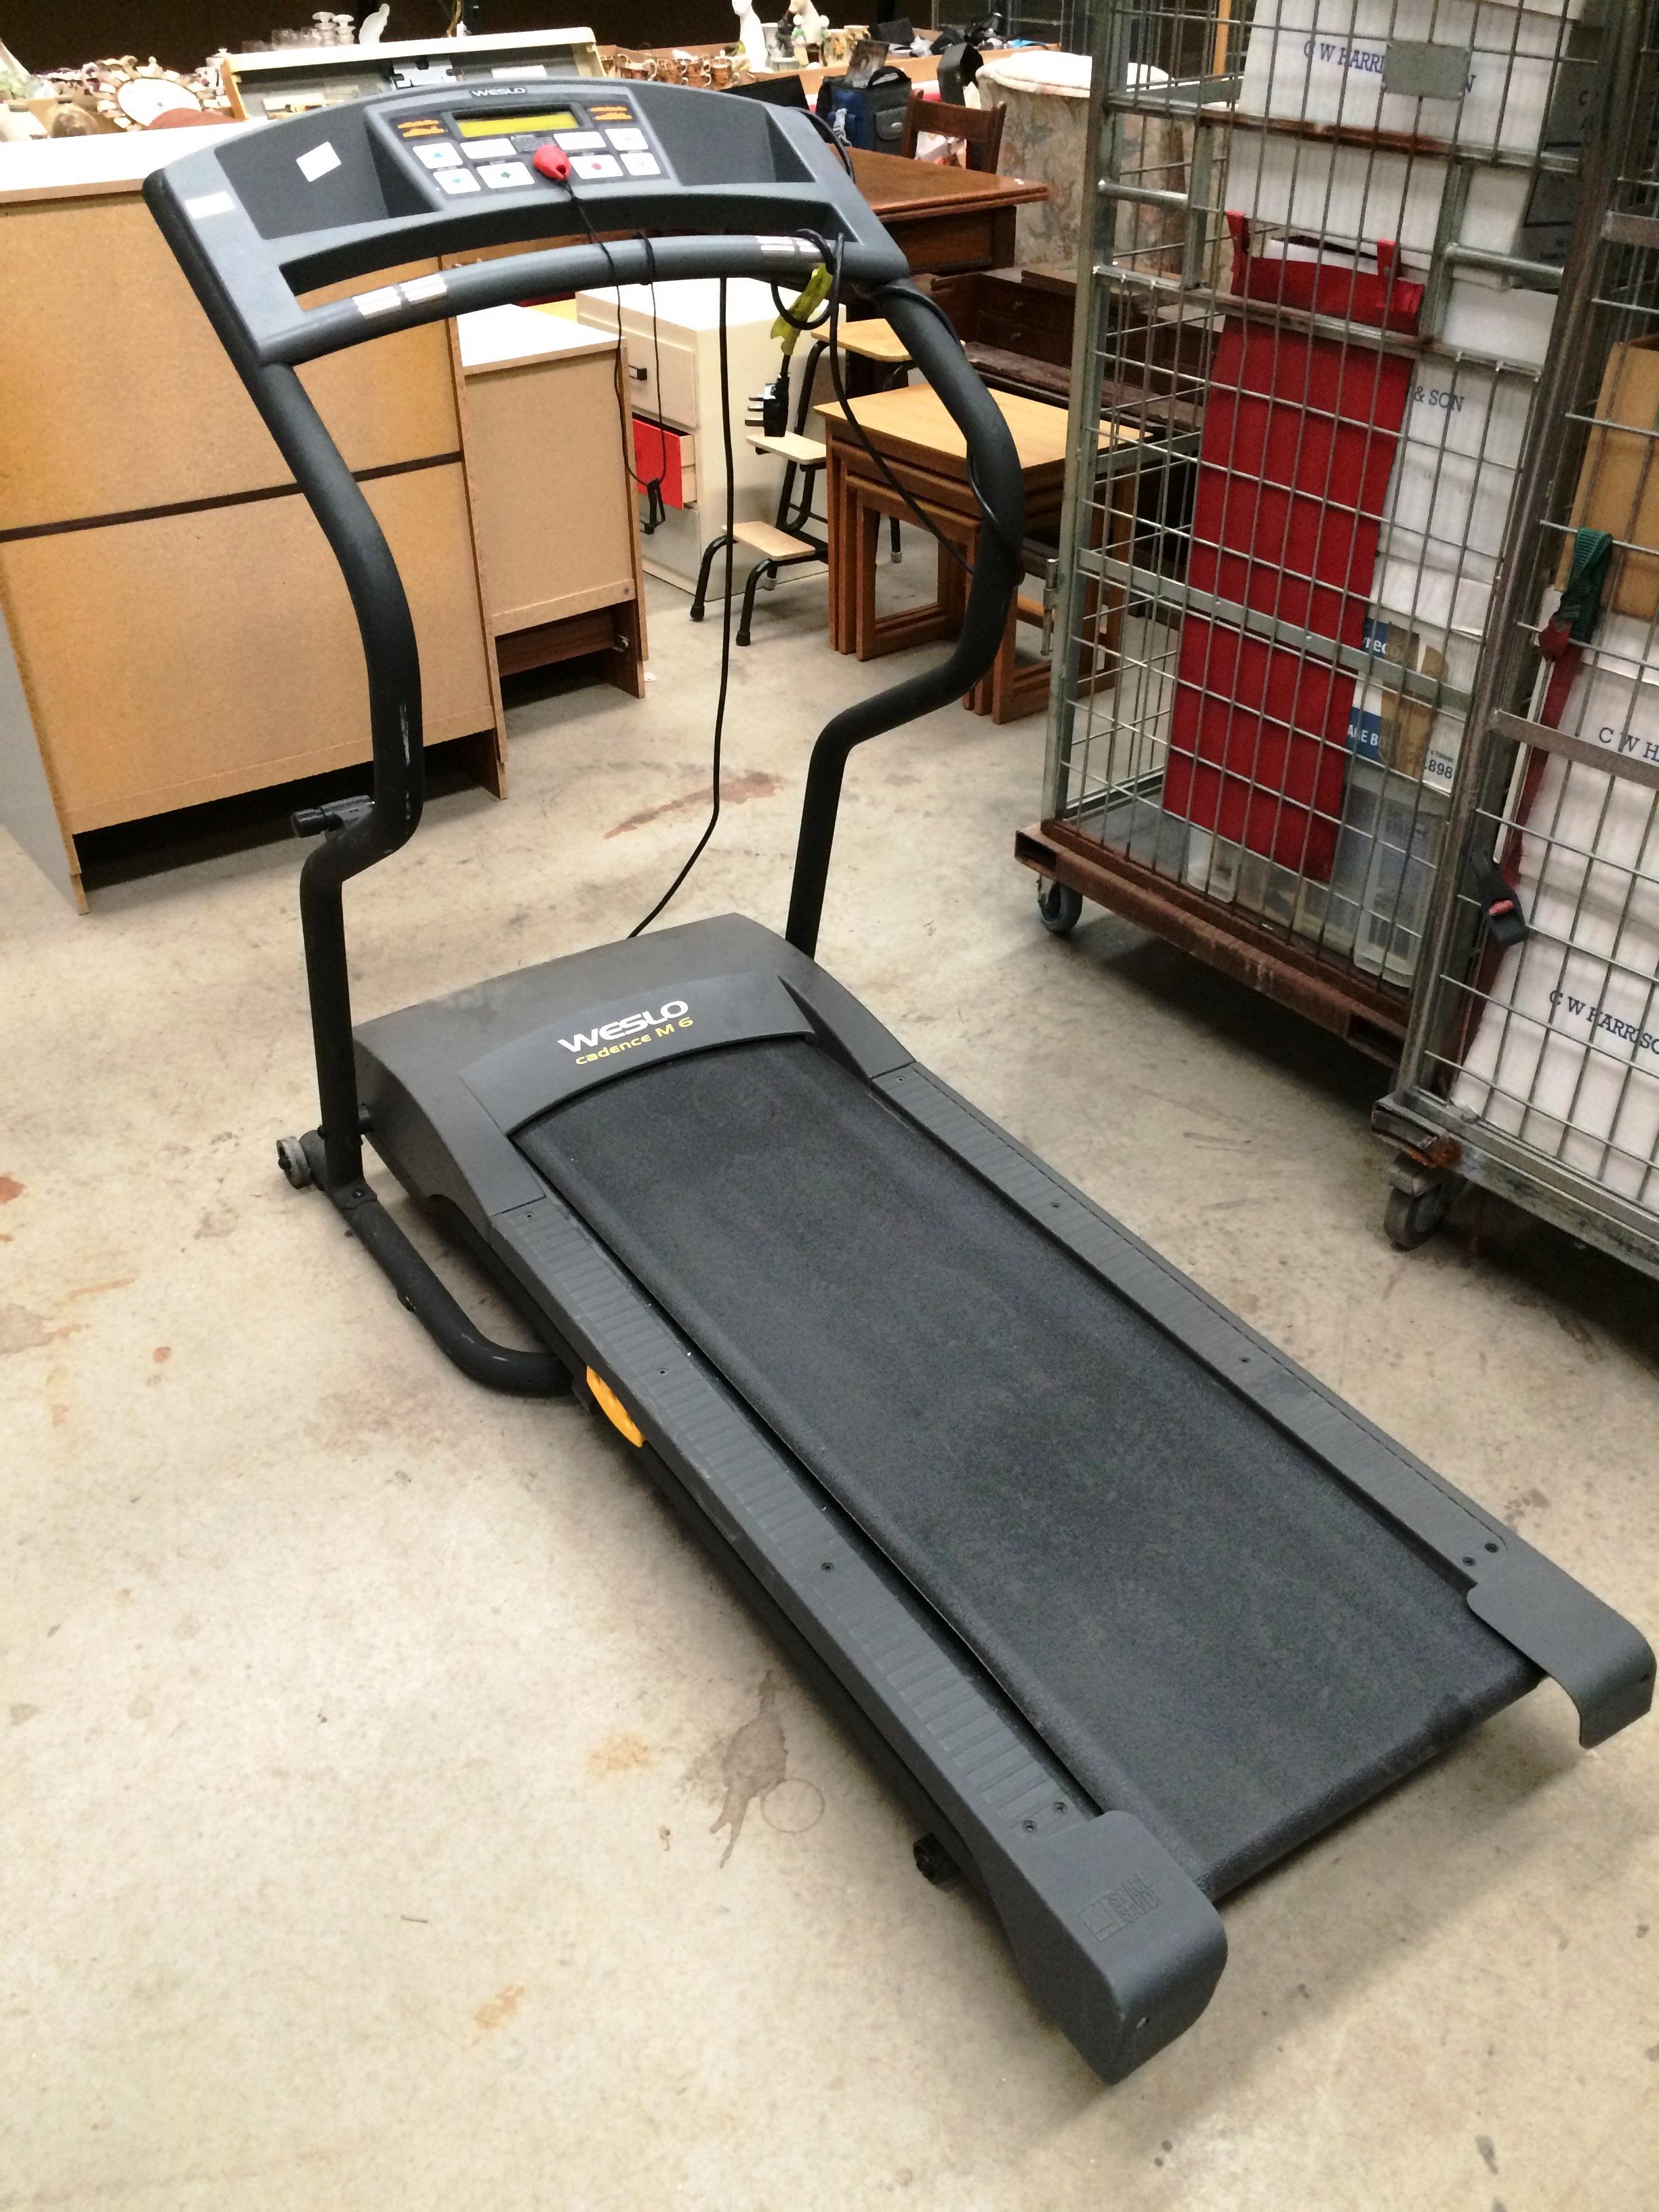 A Welso Cadence M6 running exercise machine with digital readout - 240v